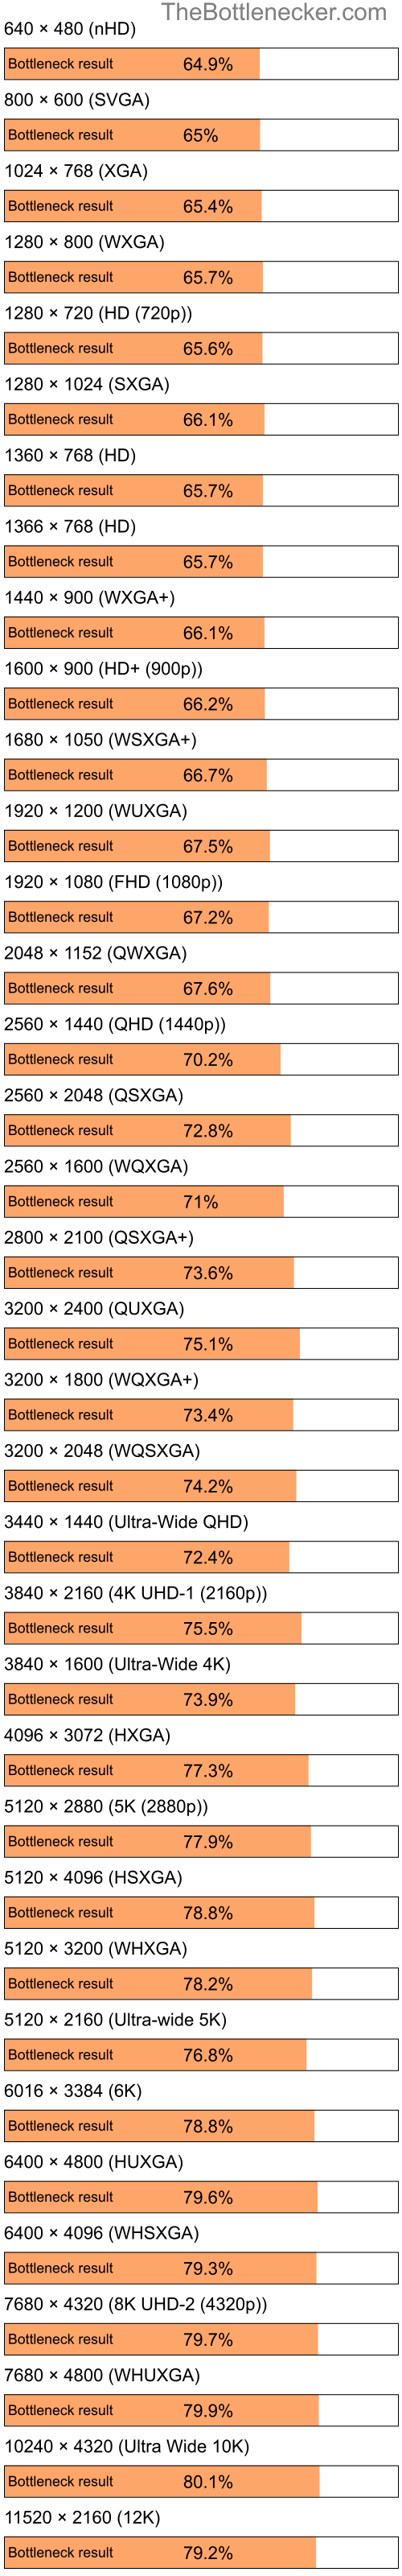 Bottleneck results by resolution for Intel Atom N280 and AMD Radeon X1300 in Processor Intense Tasks